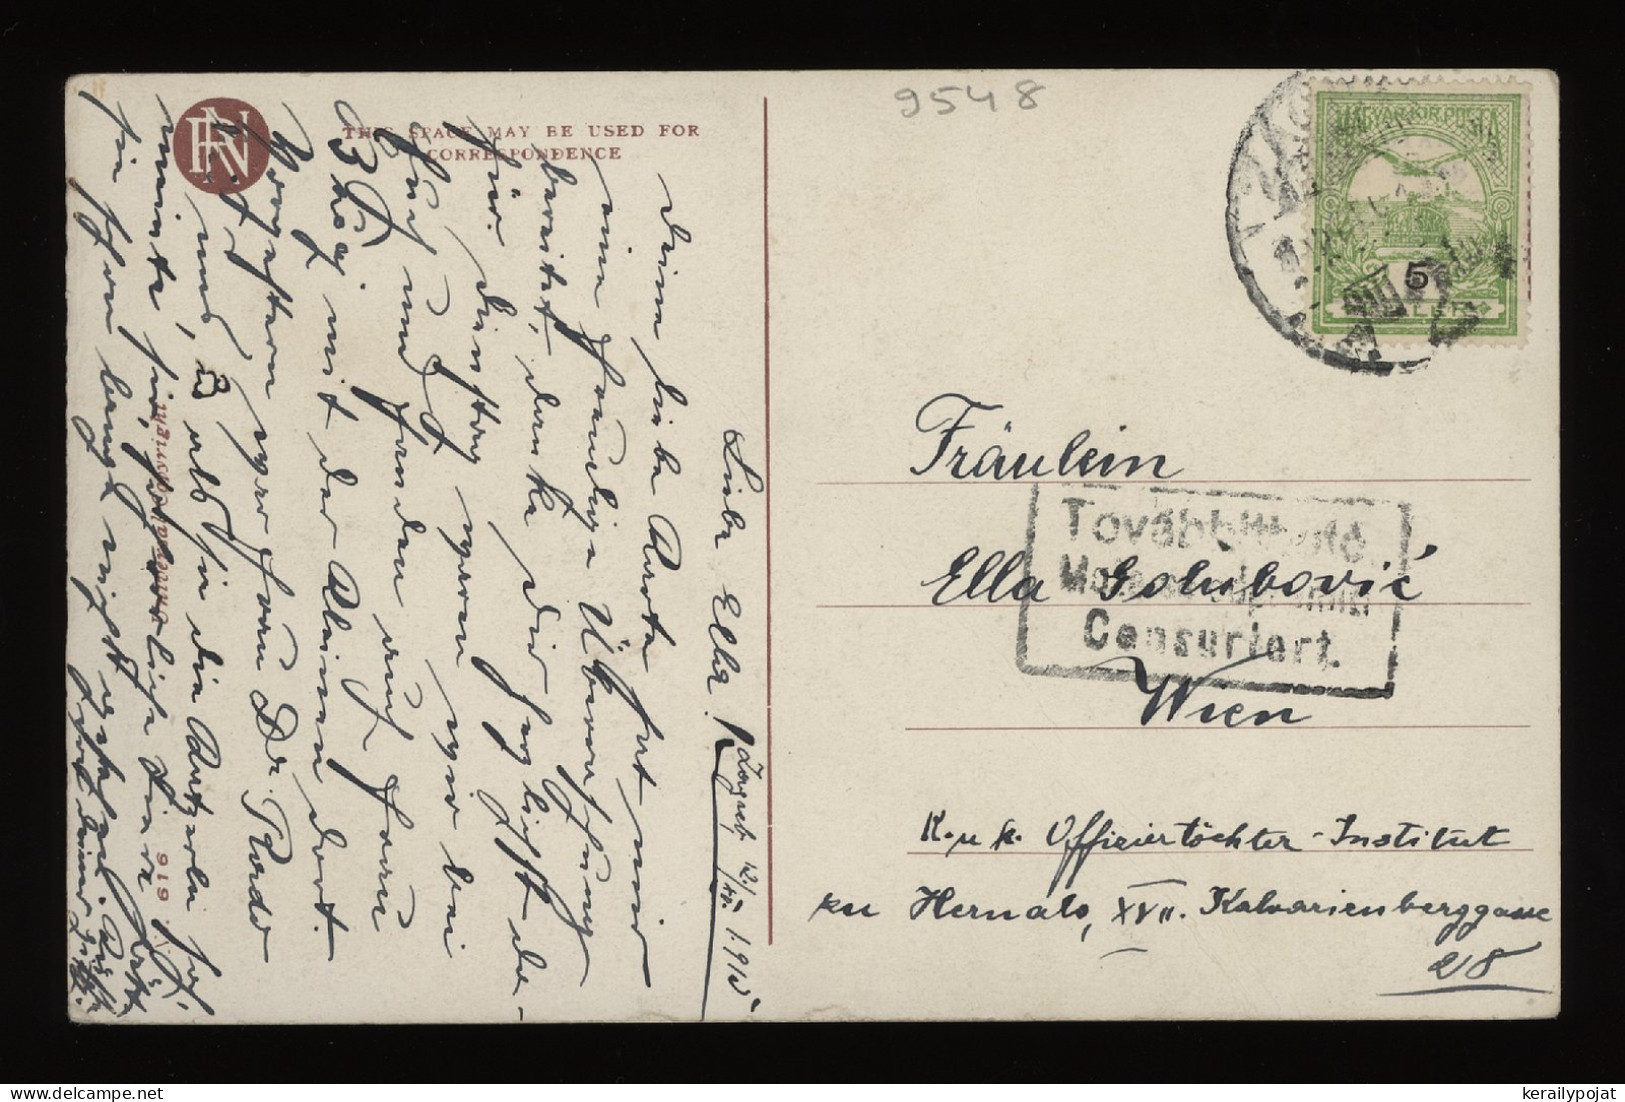 Hungary 1915 Censored Postcard To Wien__(9548) - Lettres & Documents